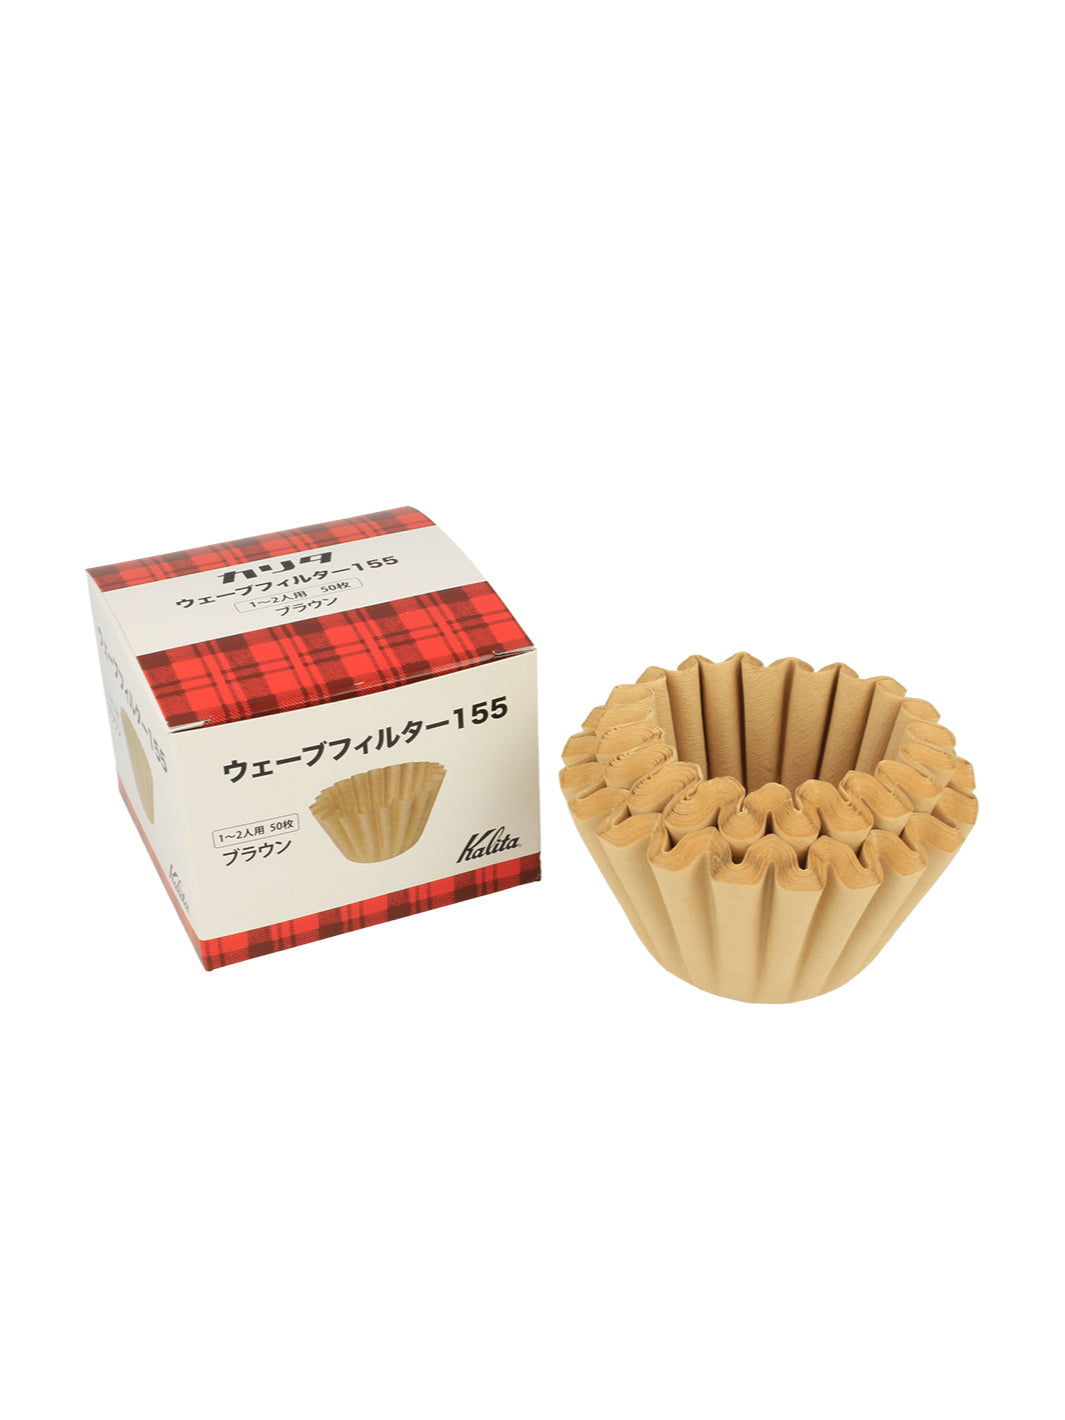 KALITA Wave 155 Filters (Unbleached) (50-Pack)